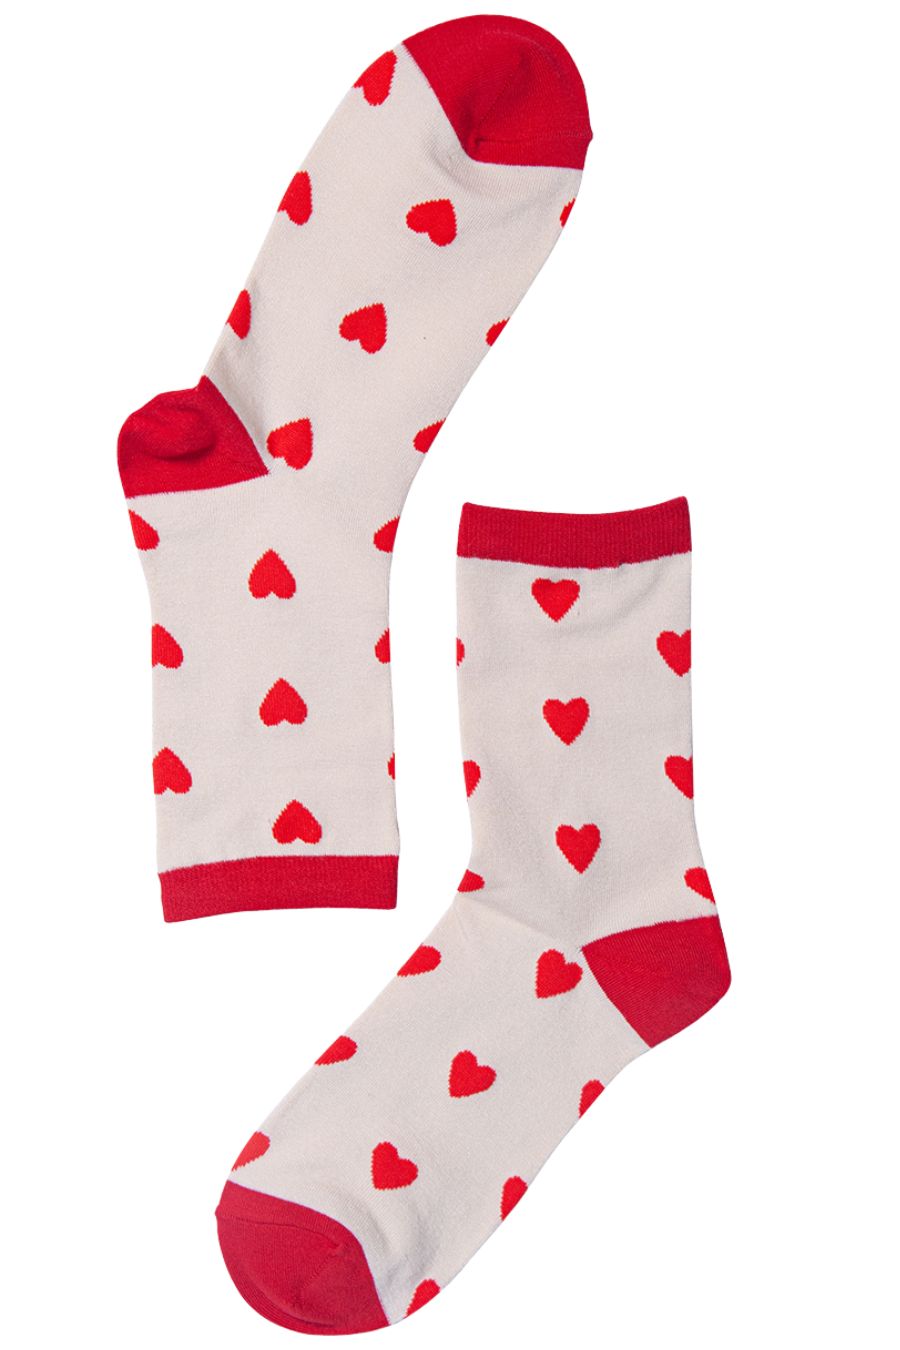 cream, red ankle socks with red love hearts